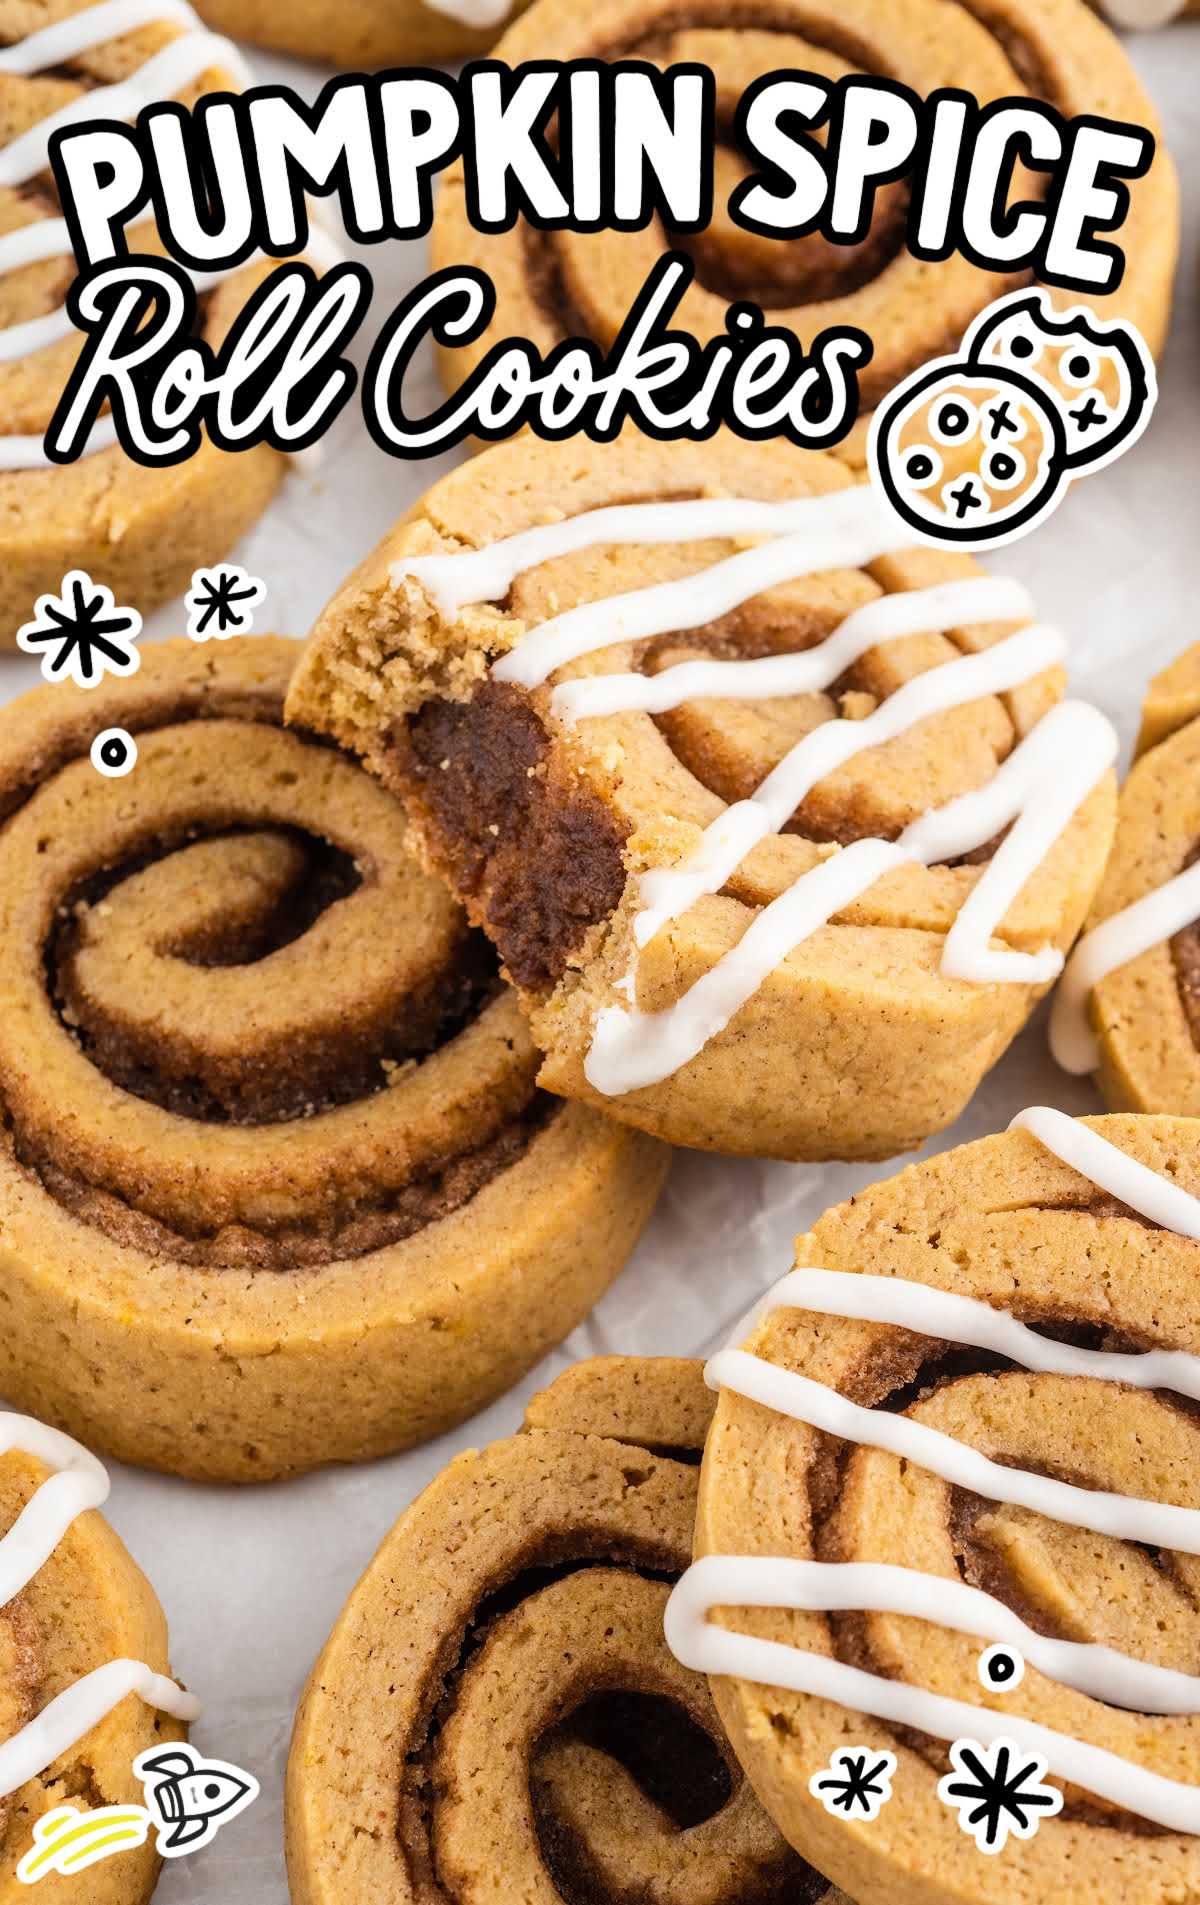 a close up shot of Pumpkin Spice Roll Cookies with one having a bite taken out of it